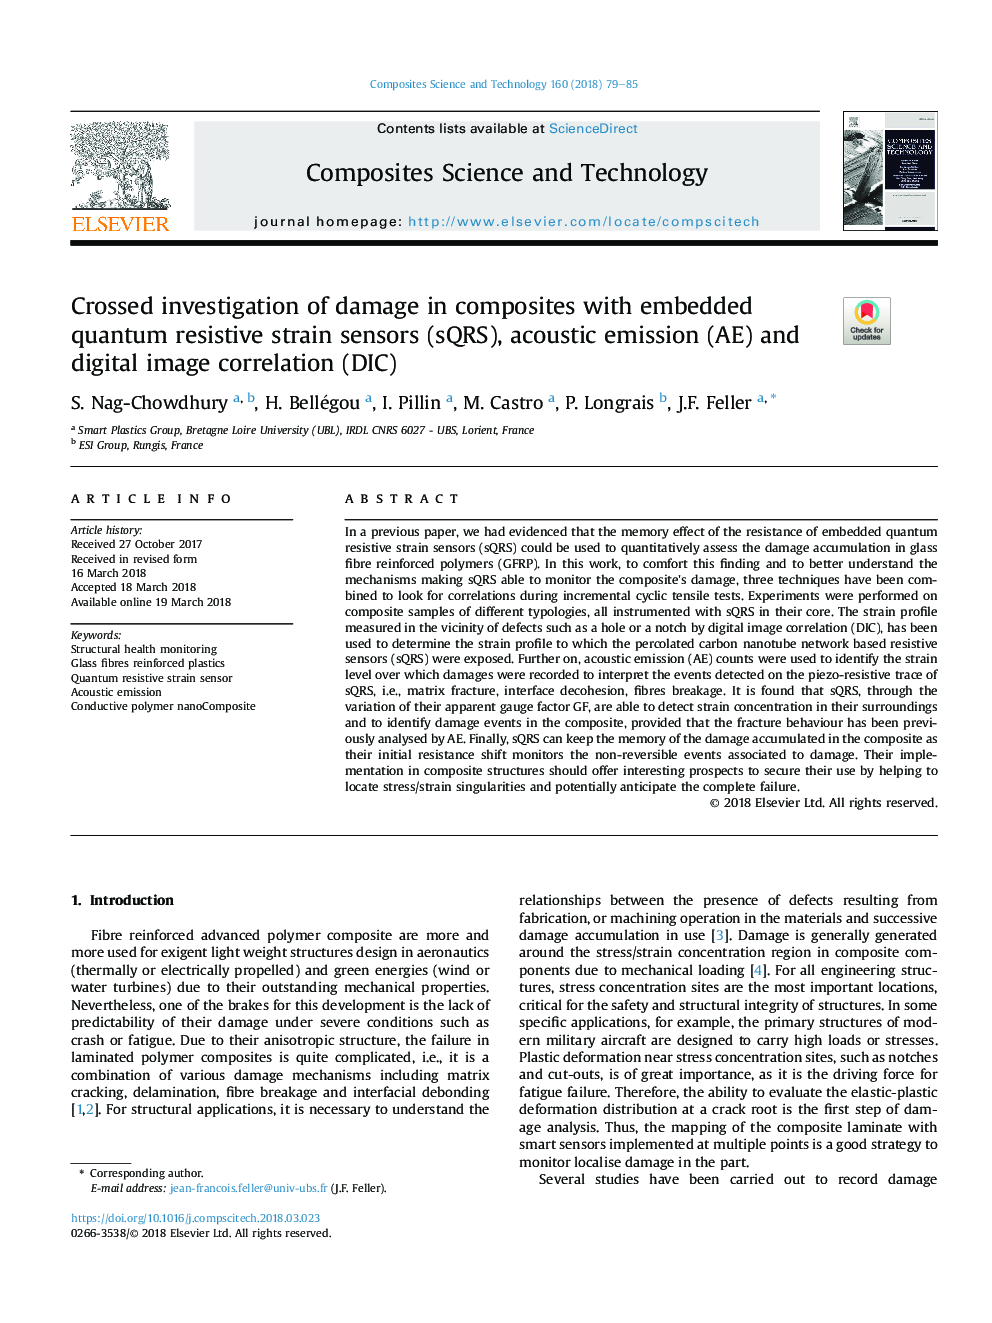 Crossed investigation of damage in composites with embedded quantum resistive strain sensors (sQRS), acoustic emission (AE) and digital image correlation (DIC)